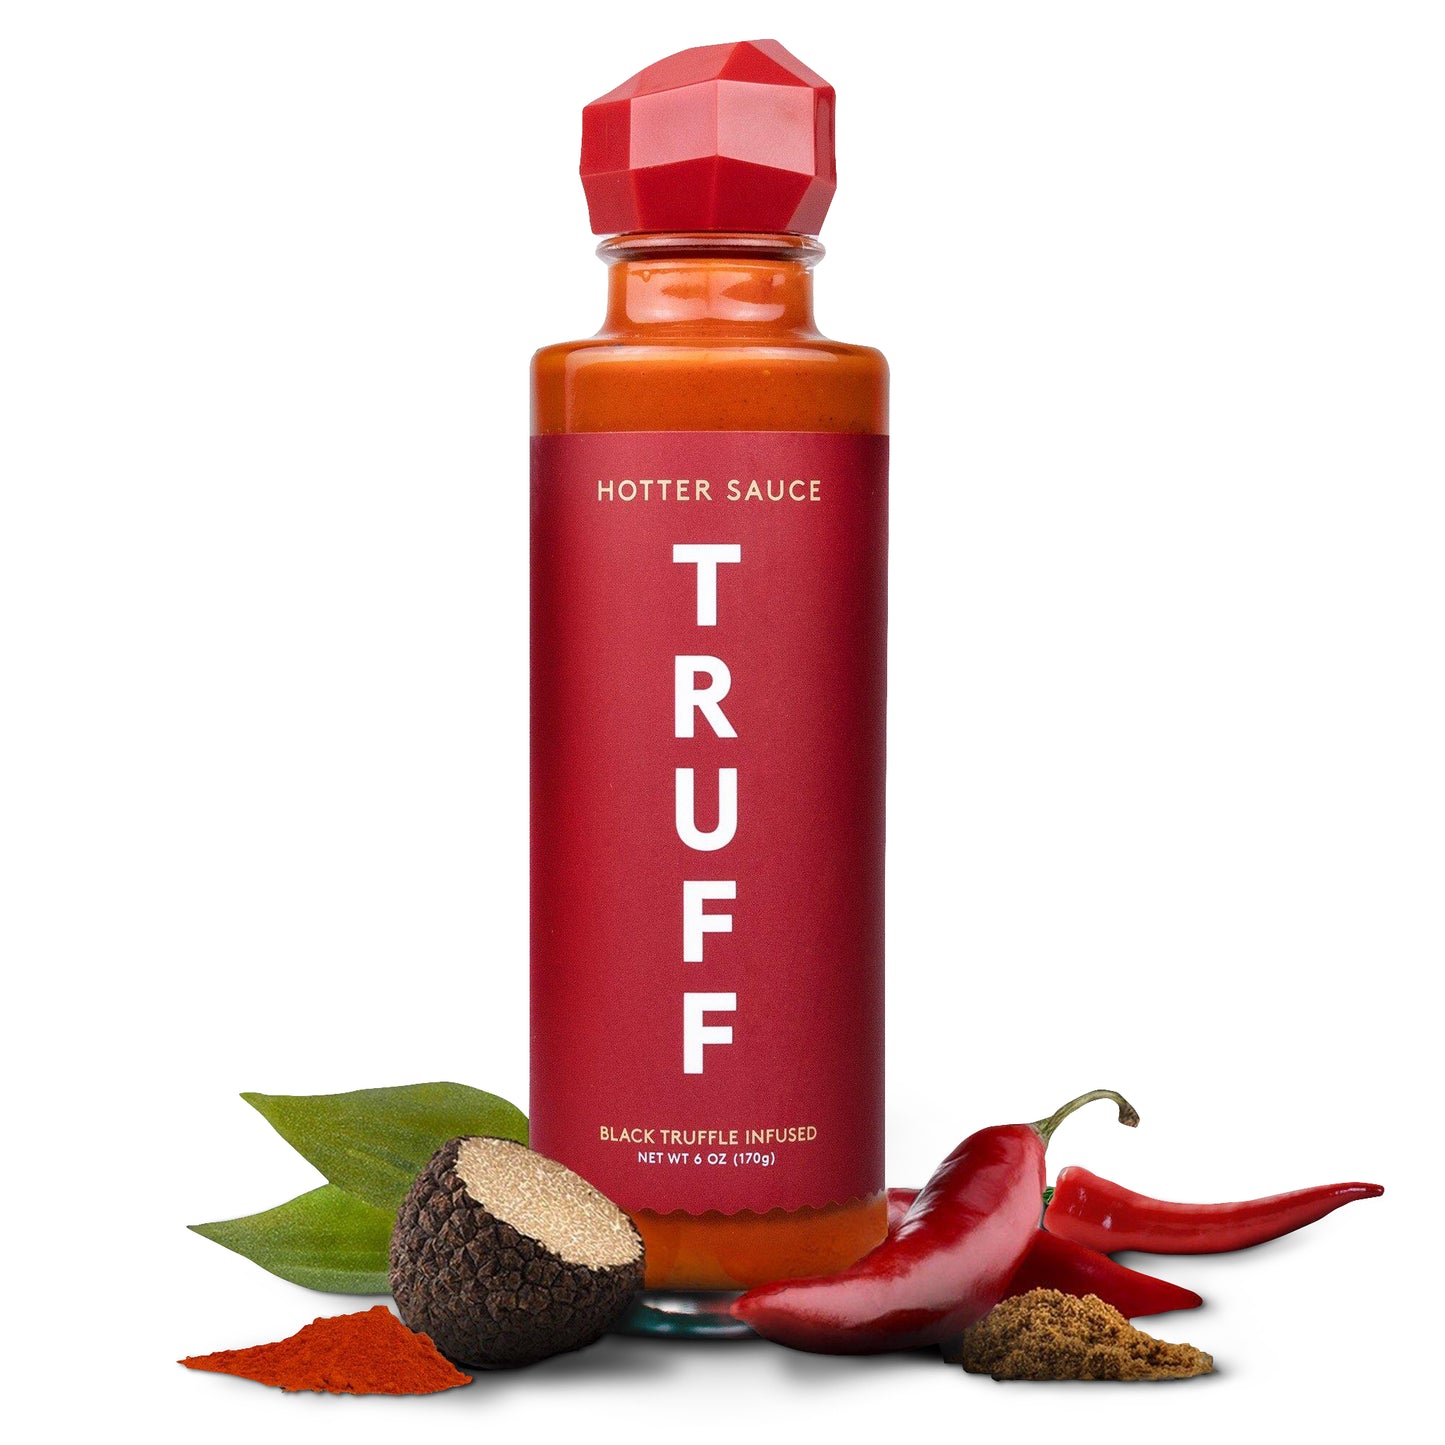 Truff Truffle Infused Hot Sauce HOTTER